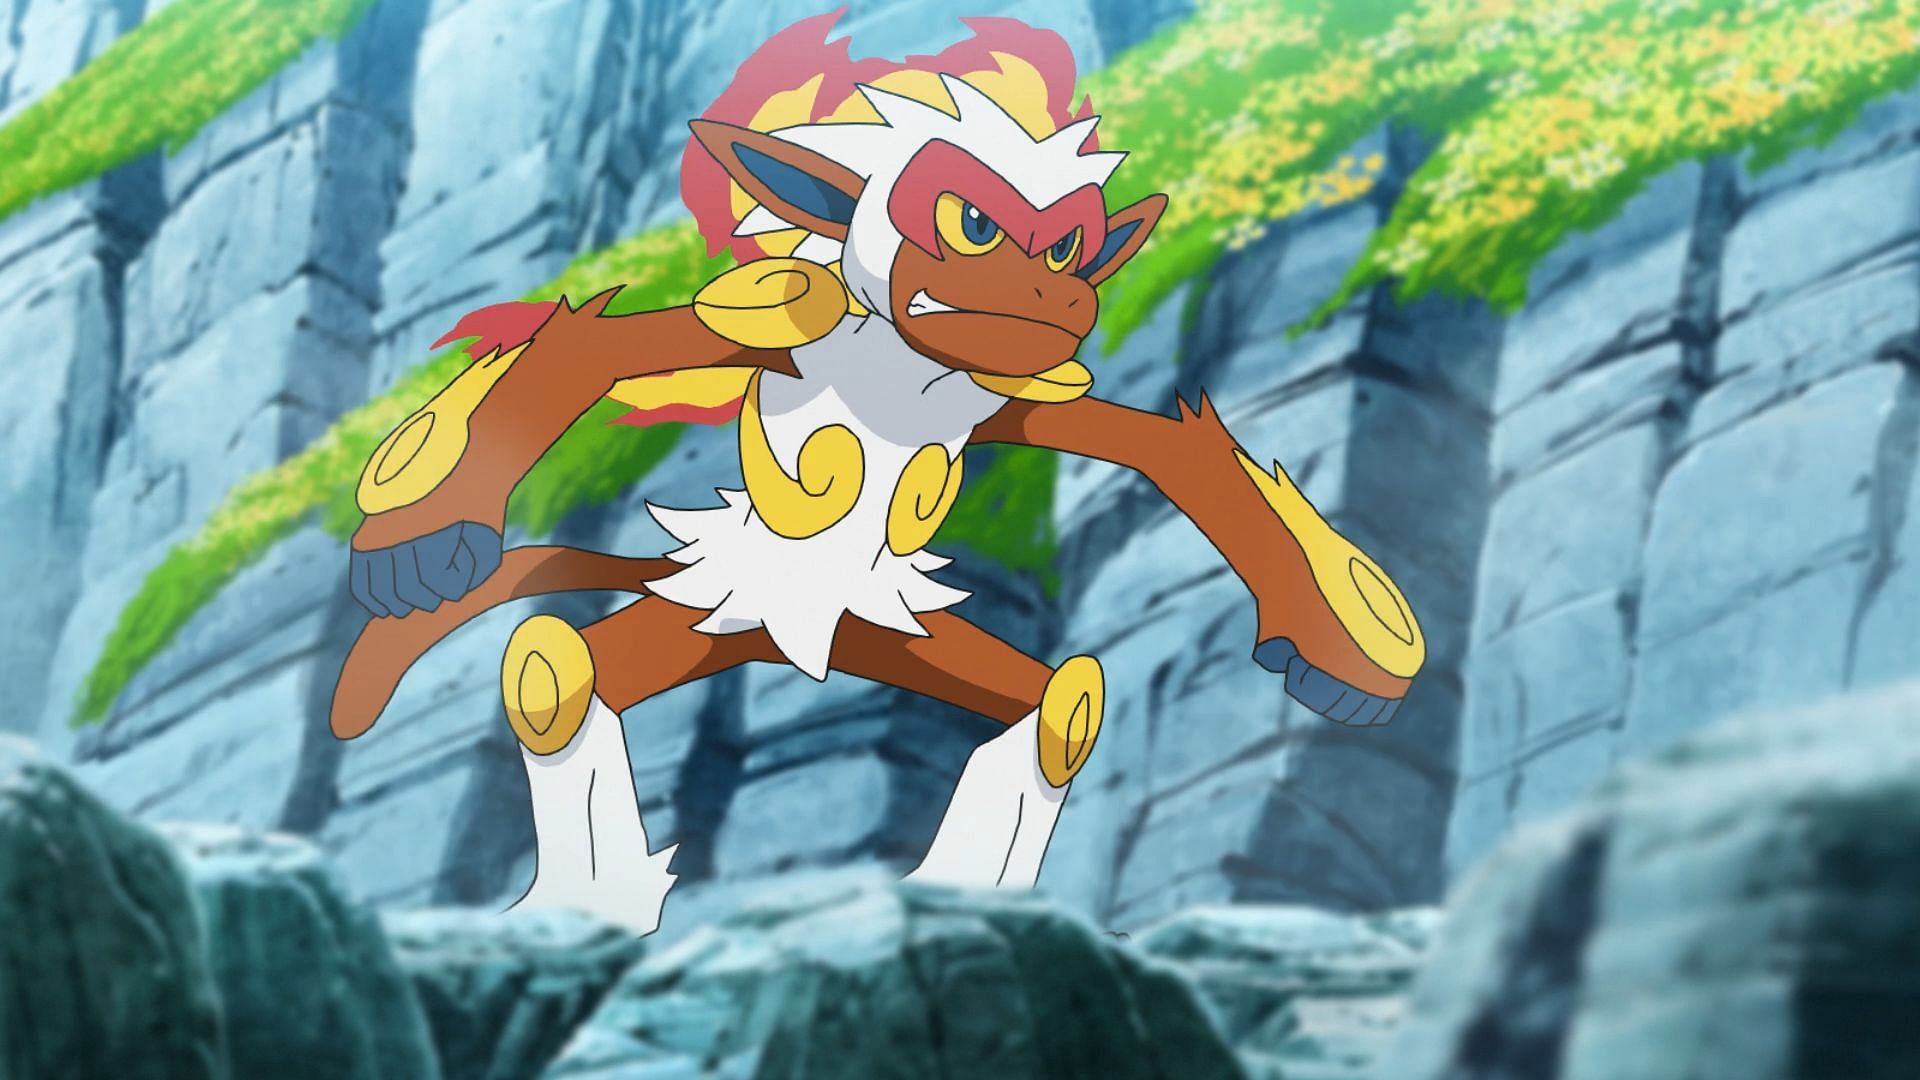 Infernape is one of the Pokemon Ash had on his team for the Sinnoh region arc of his journey. (Image via The Poekmon Company)